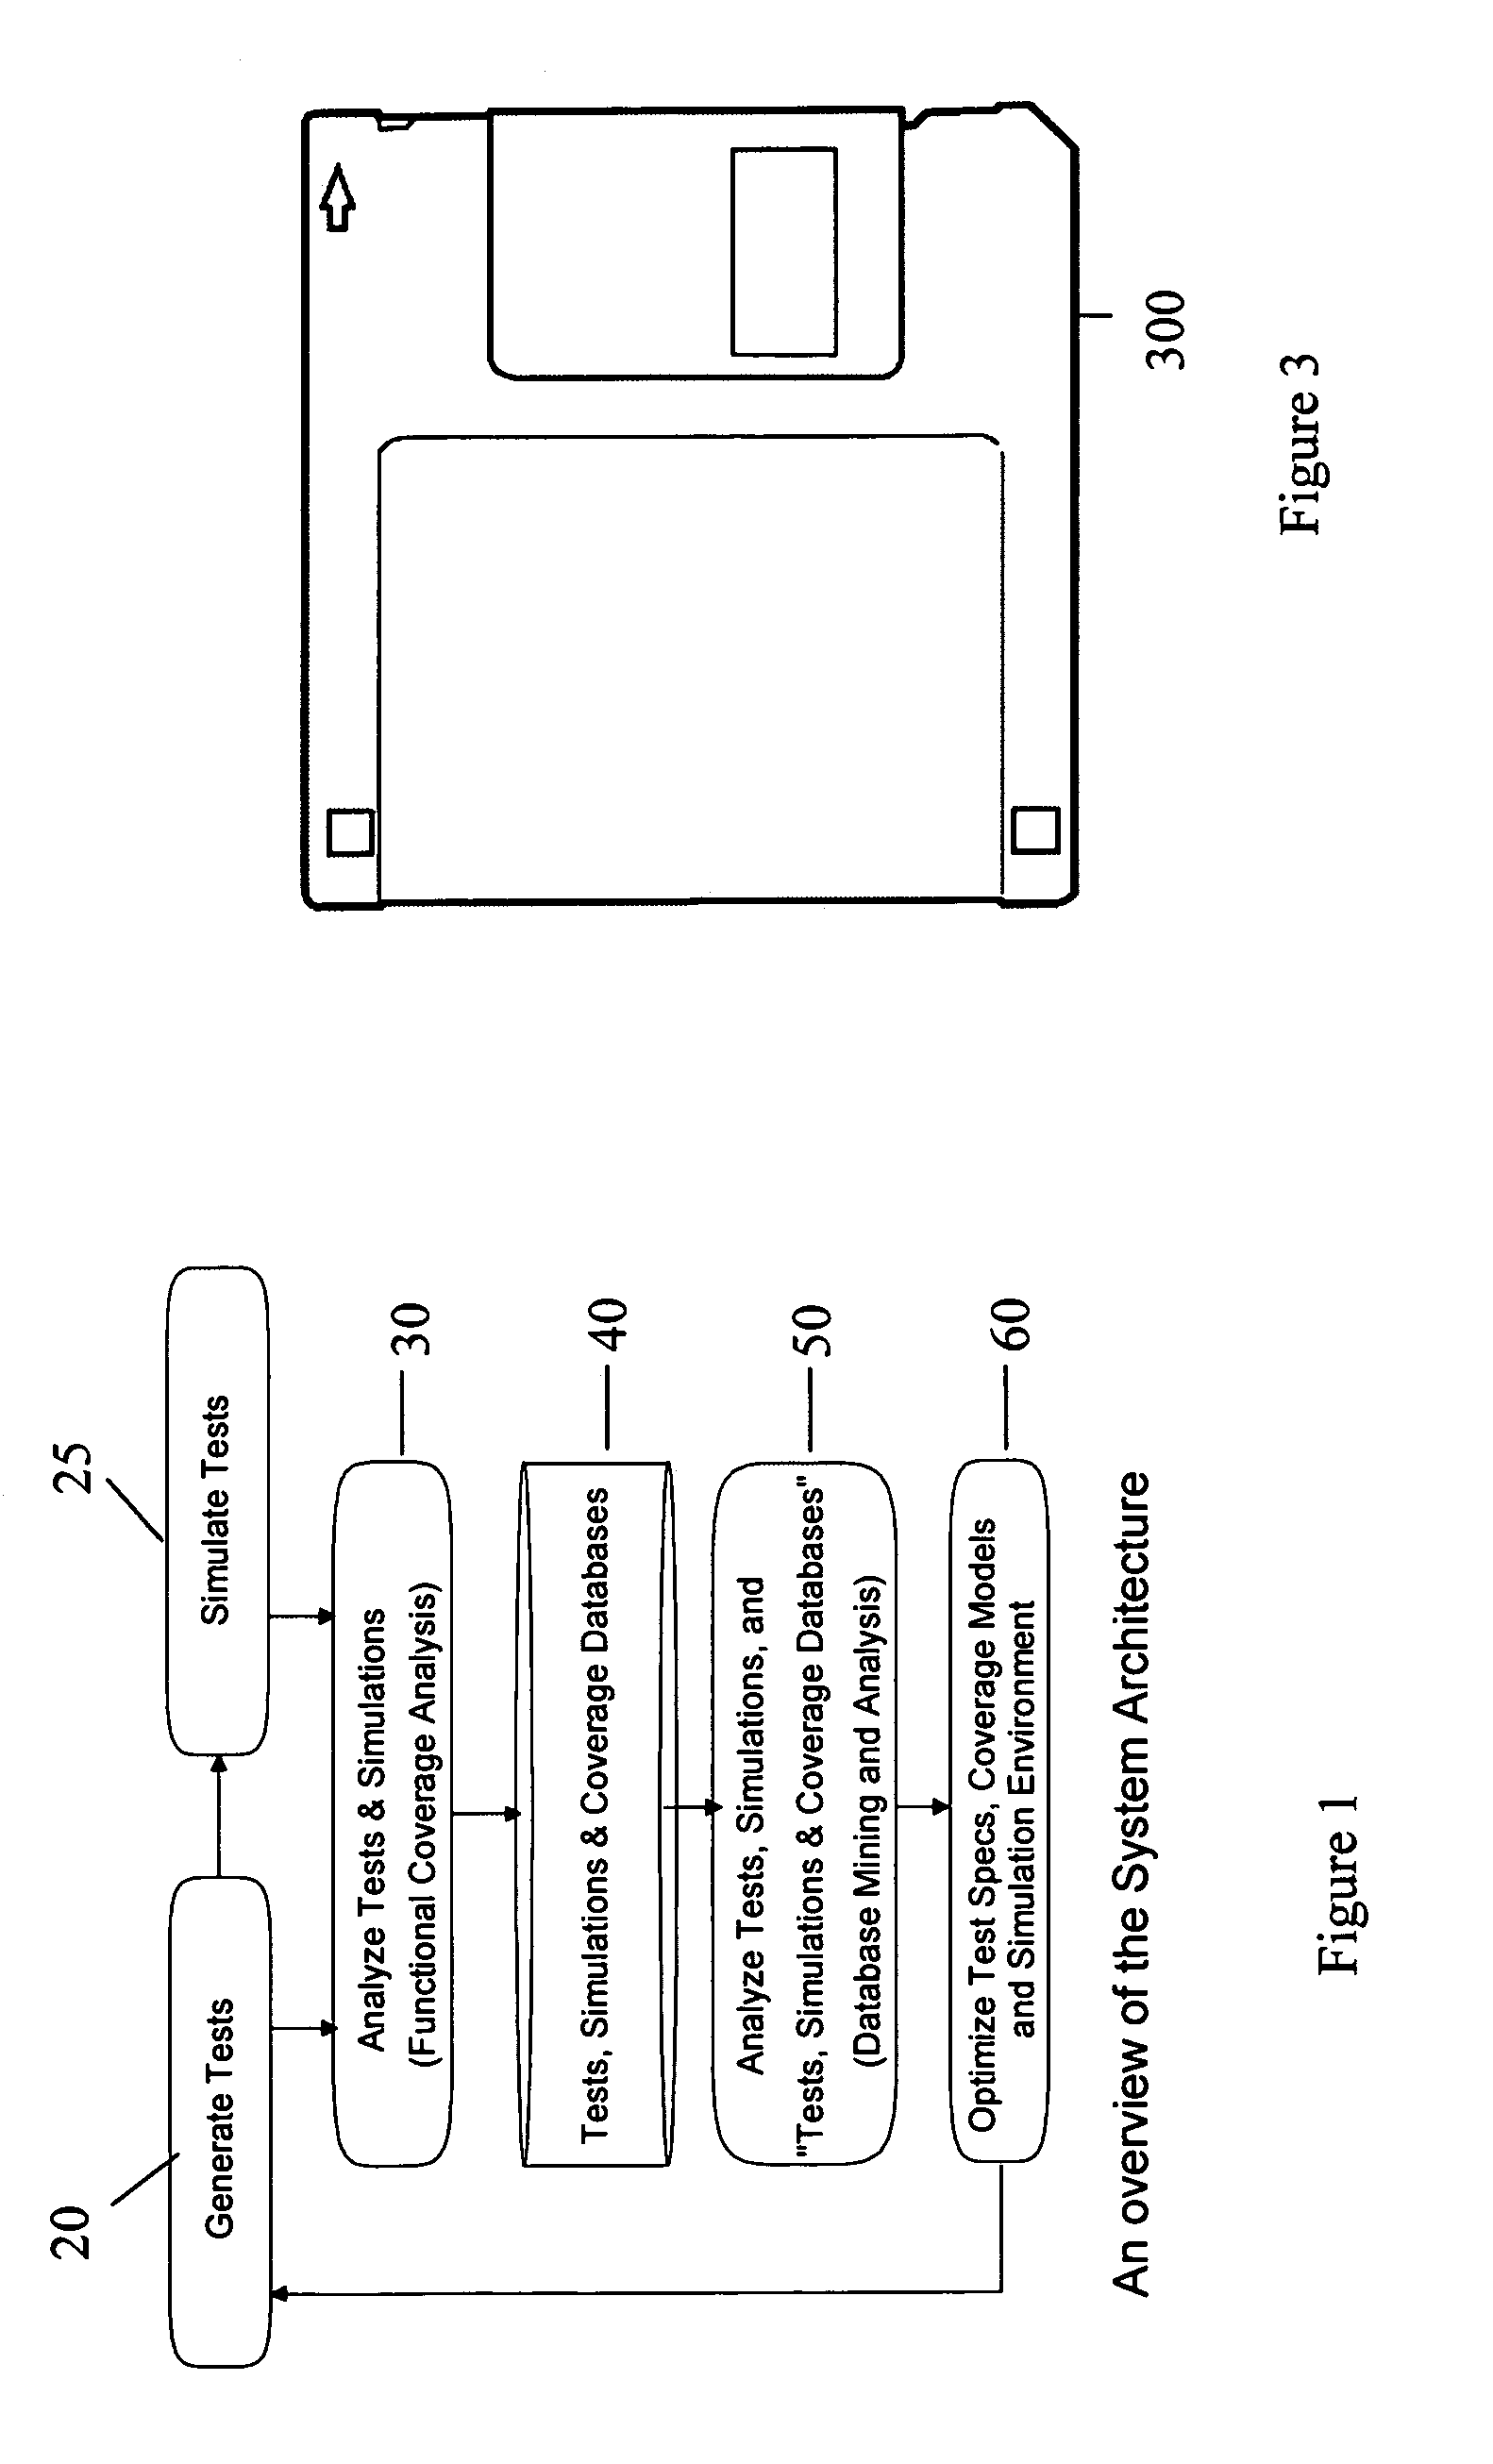 Database mining system and method for coverage analysis of functional verification of integrated circuit designs